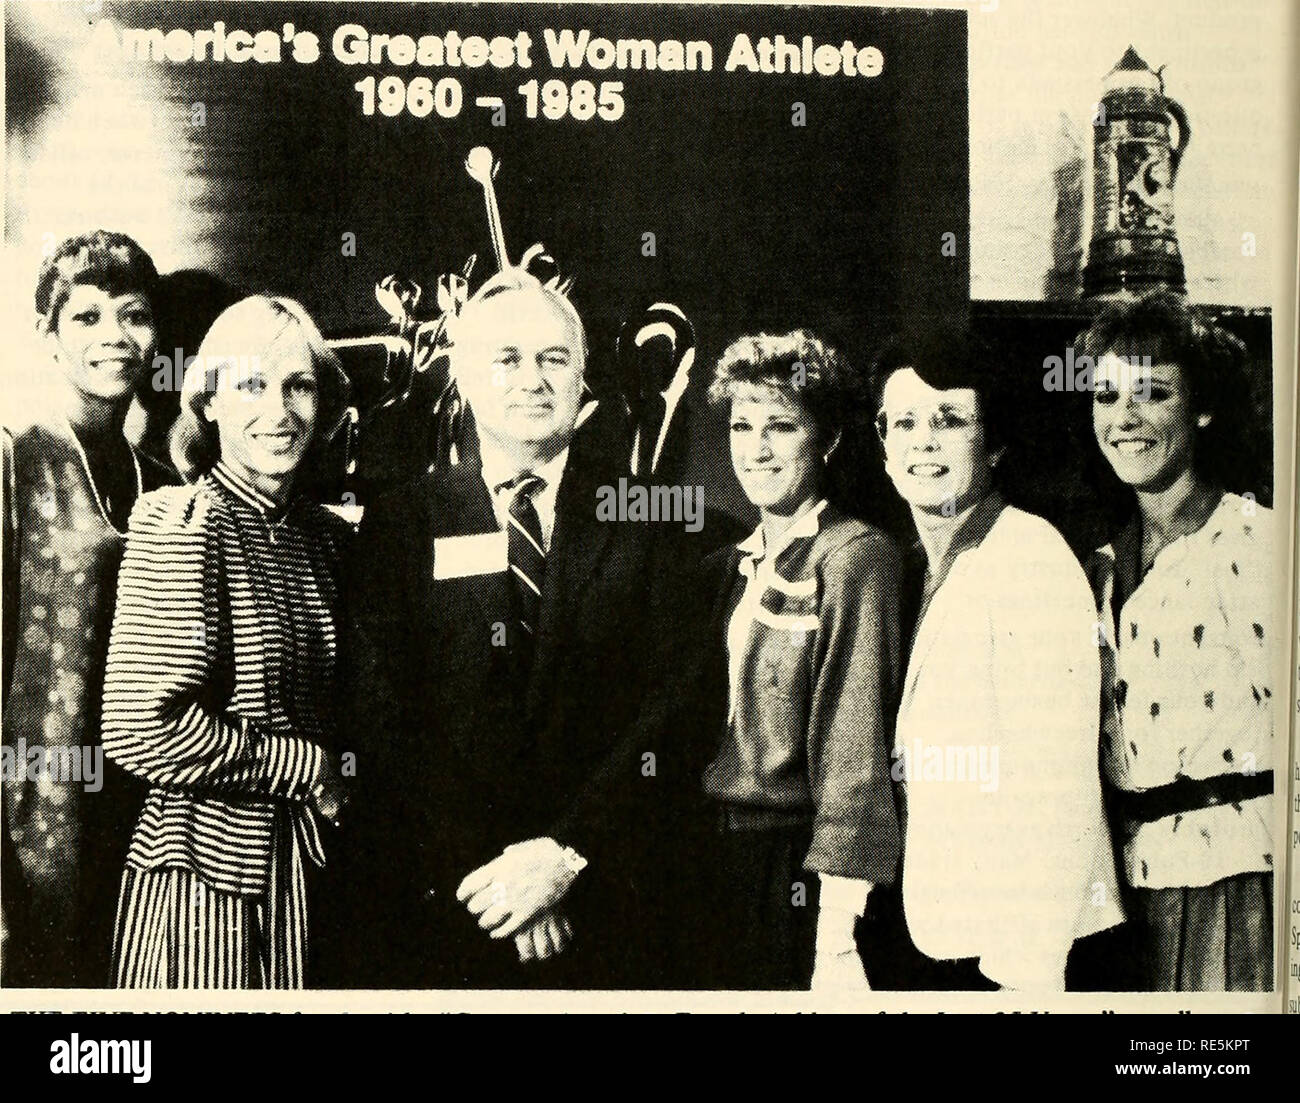 . Cranberries; : the national cranberry magazine. Cranberries. Who is greatest woman athlete?. THE FIVE NOMINEES for the title, &quot;Greatest American Female Athlete of the Last 25 Years,&quot; are all very recognizable and are seen above with Jack Llewellyn, Ocean Spray's senior vice president, marketing. They are, 1. to r.: Wilma Rudolph, Martina Navratilova, Chris Evert Lloyd, Billie Jean King, Mary Decker. With the effort to select the April 1985 following a six Spray is issuing 20 million month poU of millions of ballots through four color American consumers. Ocean advertisements in heal Stock Photo